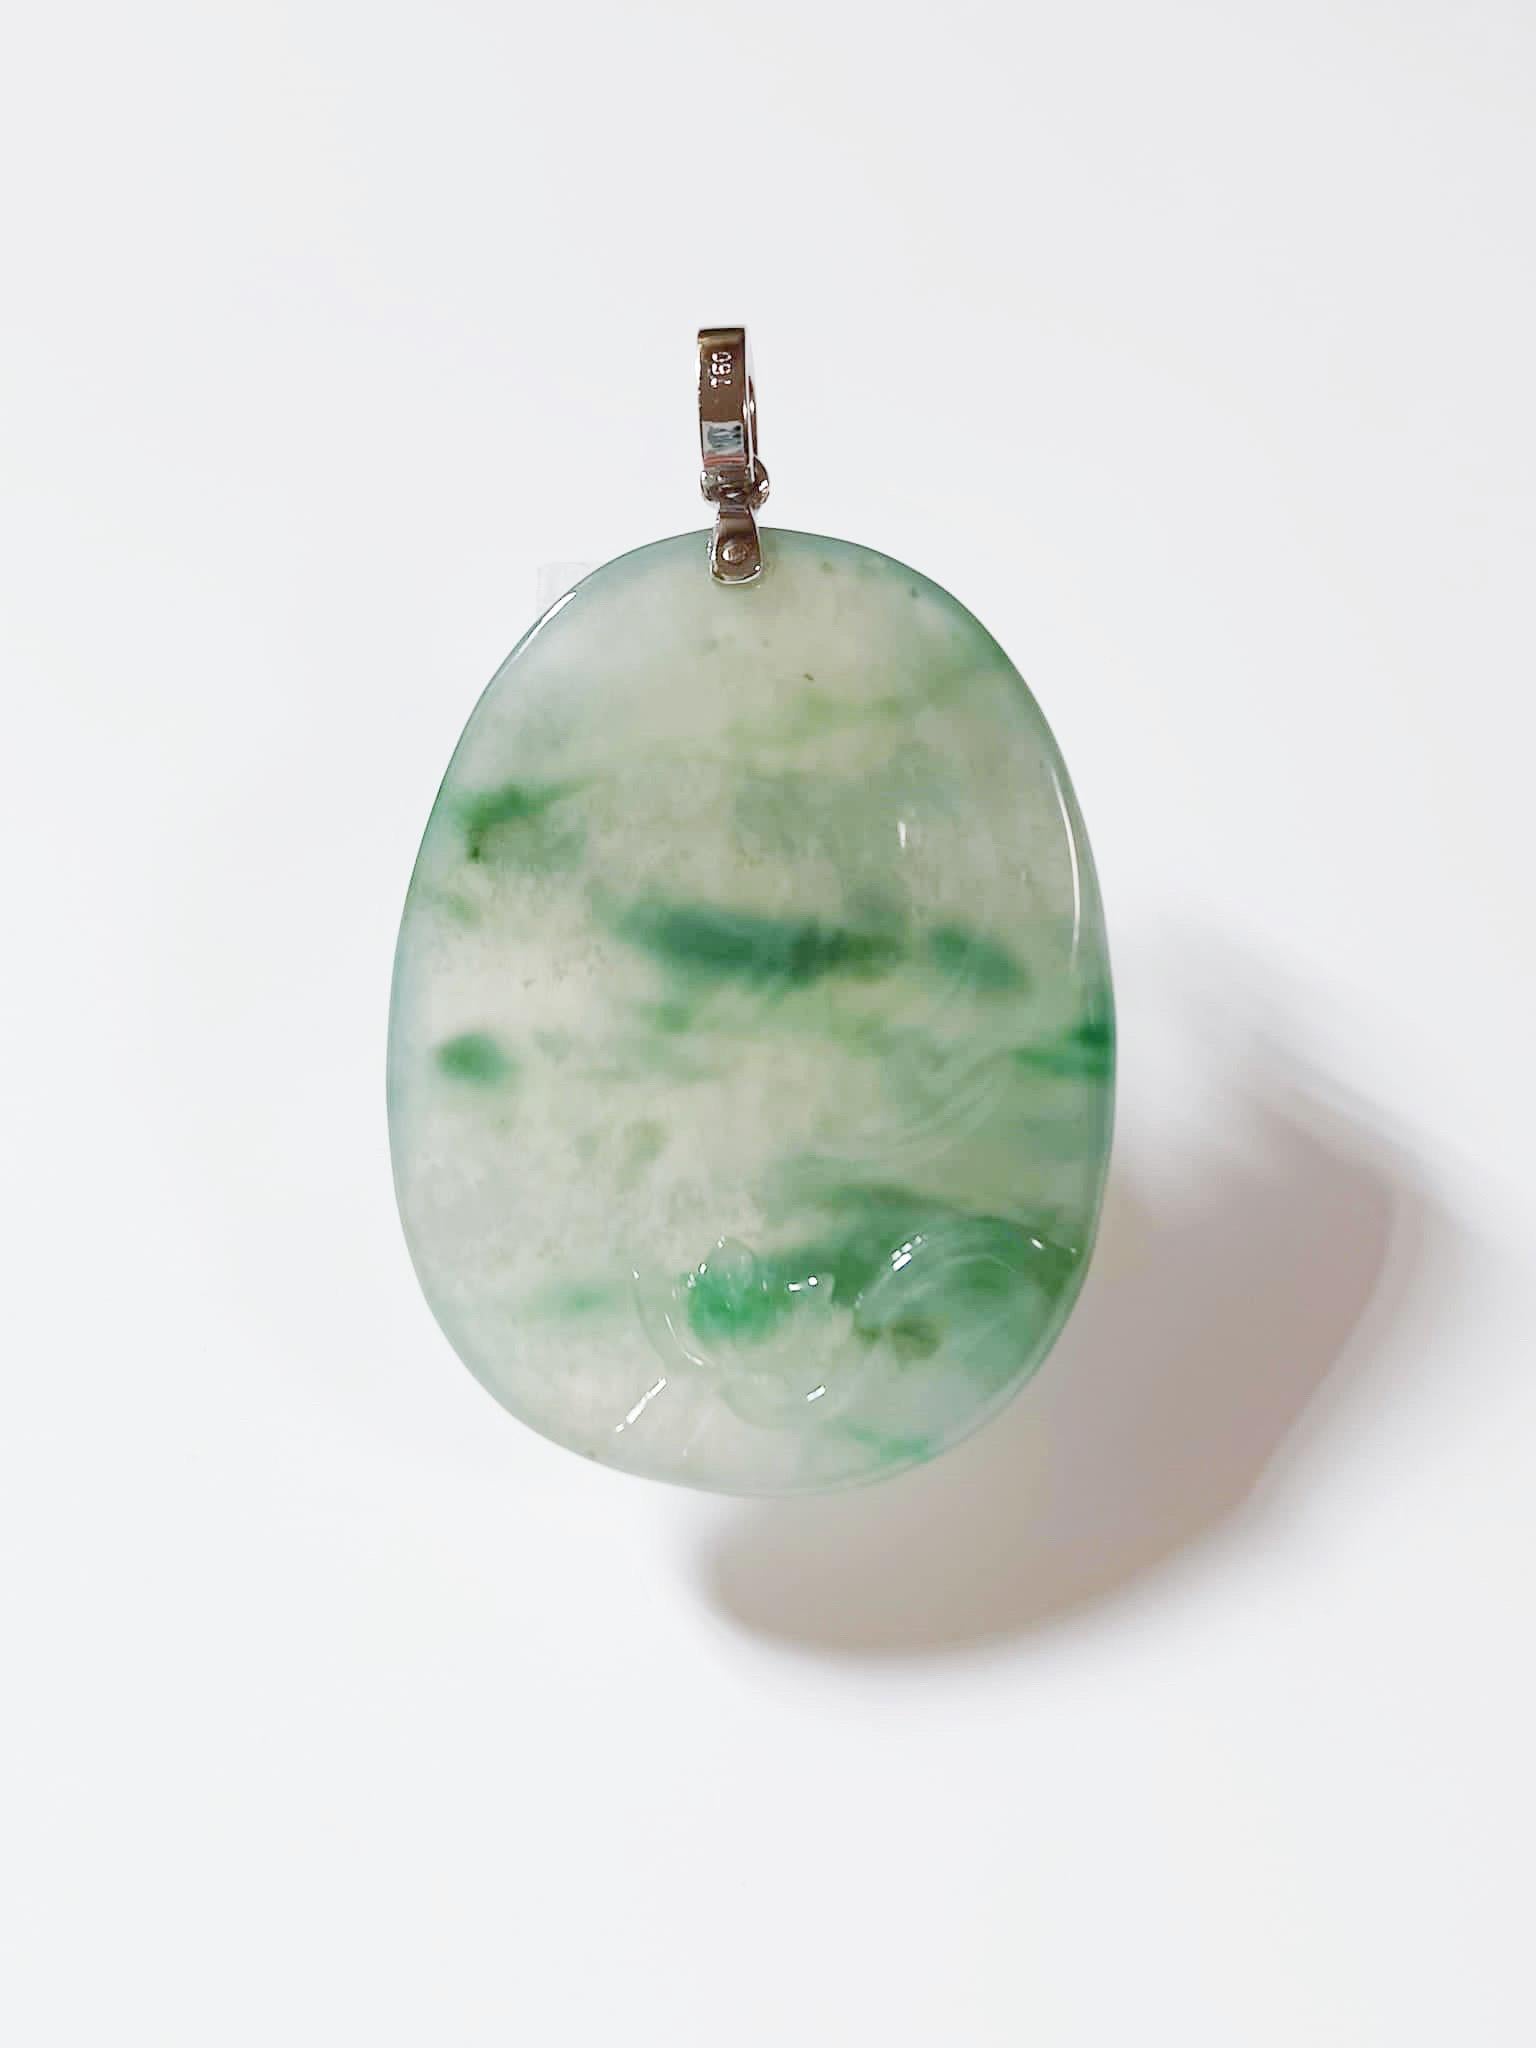 This jade pendant is 100% natural, untreated, and undyed Type-A Myanmar jadeite jade. It is hand-carved into Lotus Flower on both sides. The beautiful translucent icy texture with bluish-green patches gifted by Mother Nature makes this pendant